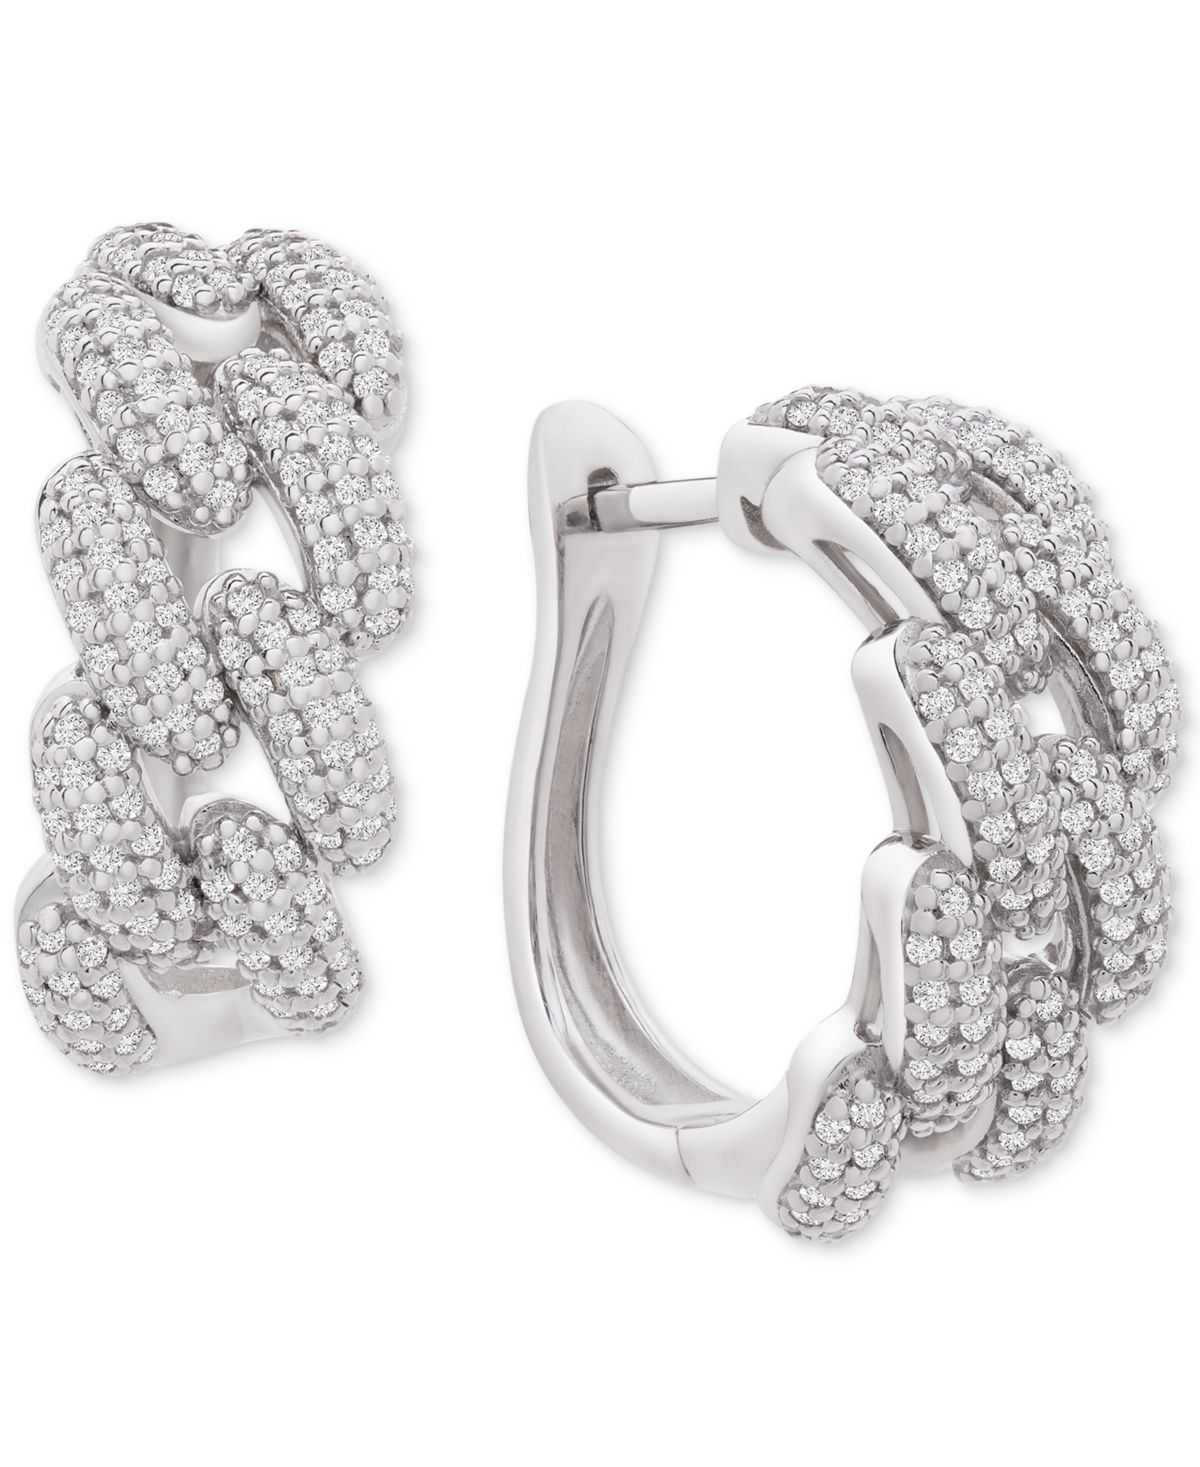 Diamond Chain Link Detail Small Hoop Earrings (1 ct. t.w.) in Sterling Silver, .79", Created for Macy's - Sterling Silver